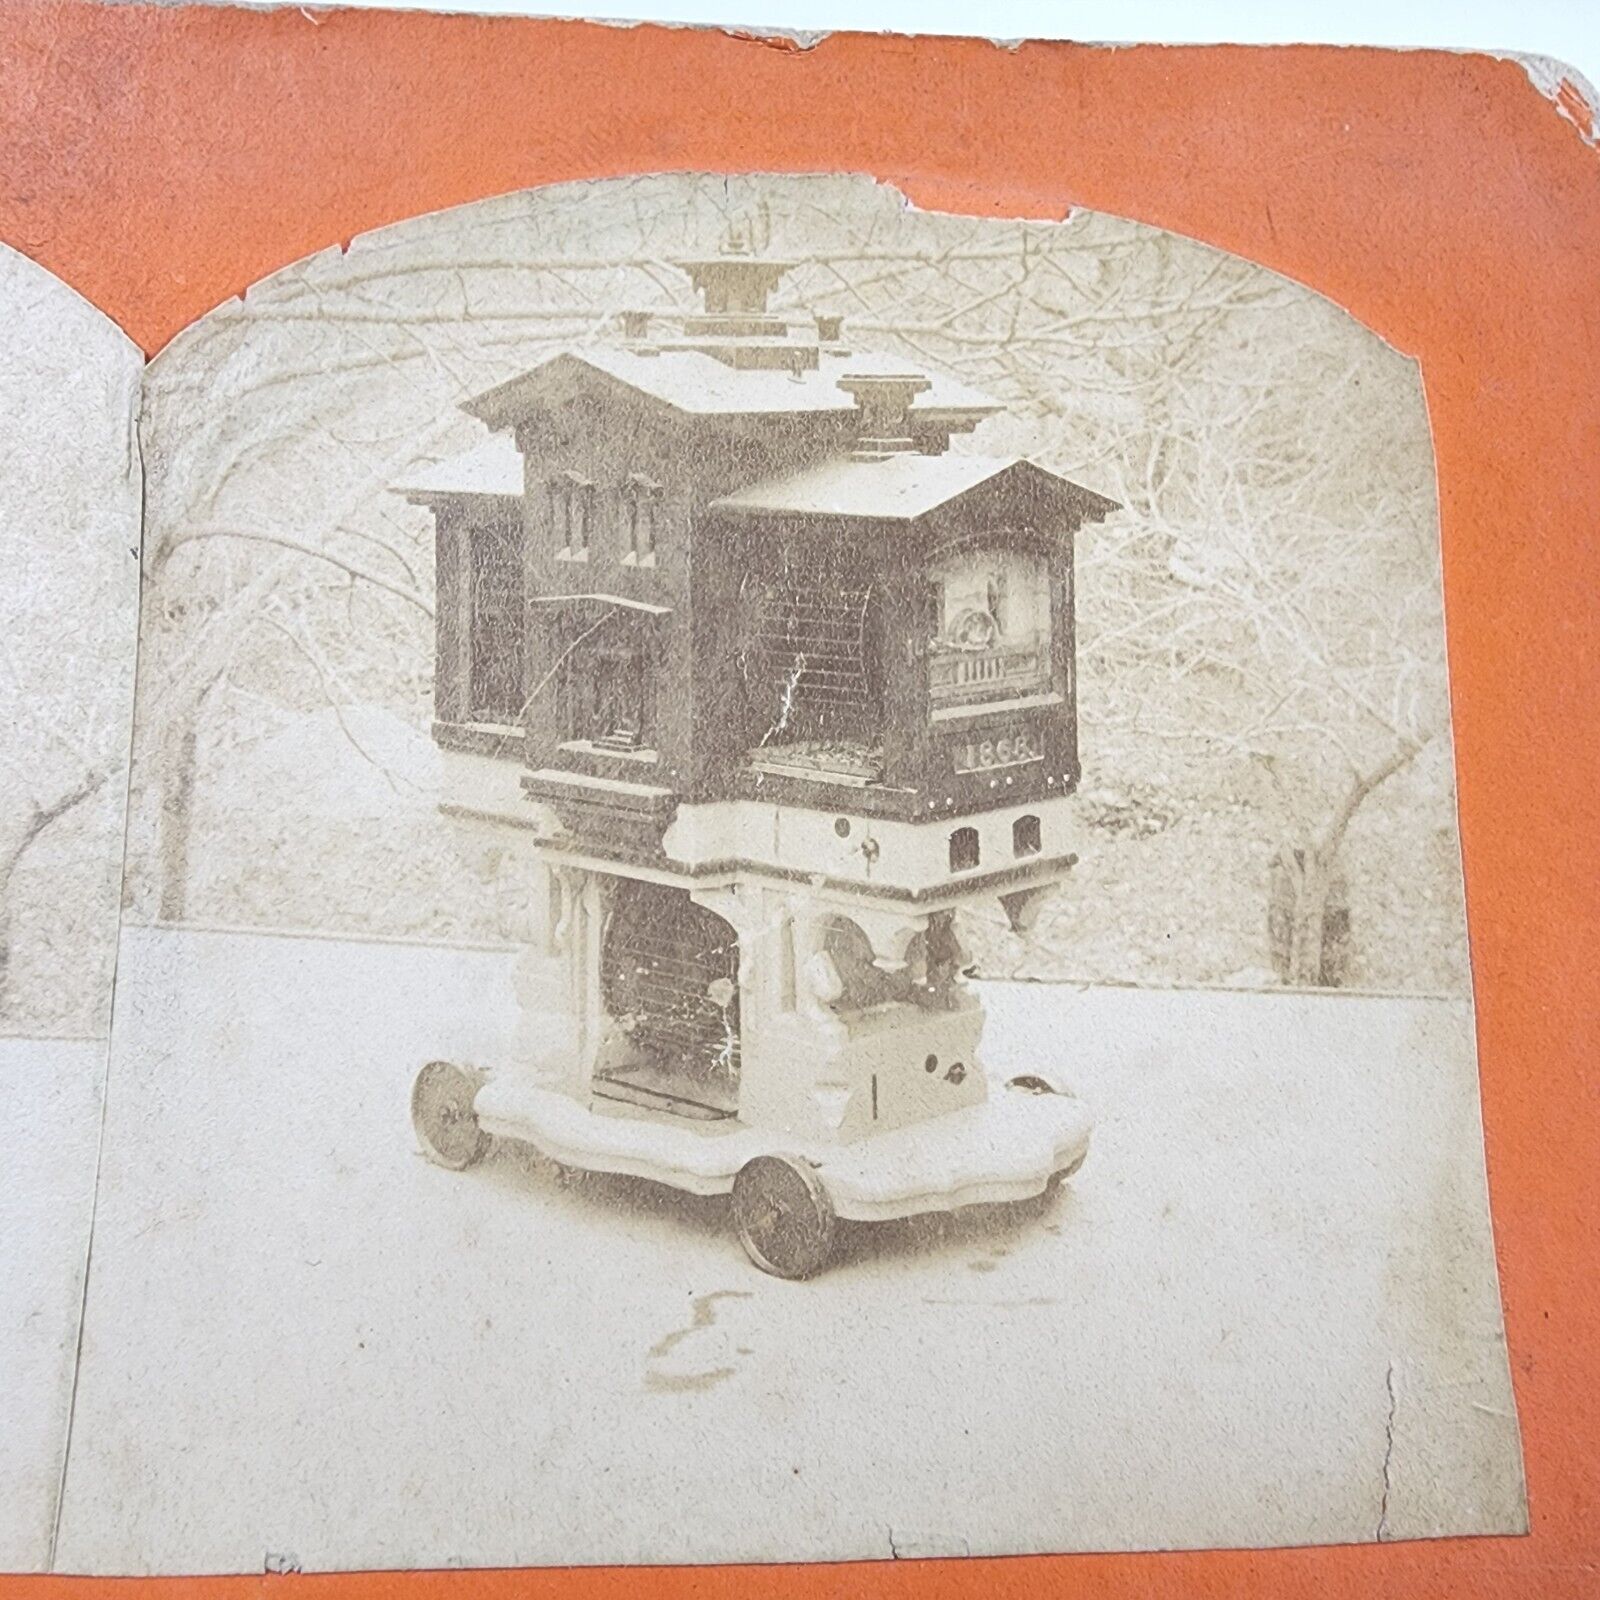 Antique Victorian Era Stereoview Card, Subject is a mobile Amusement Curiosity